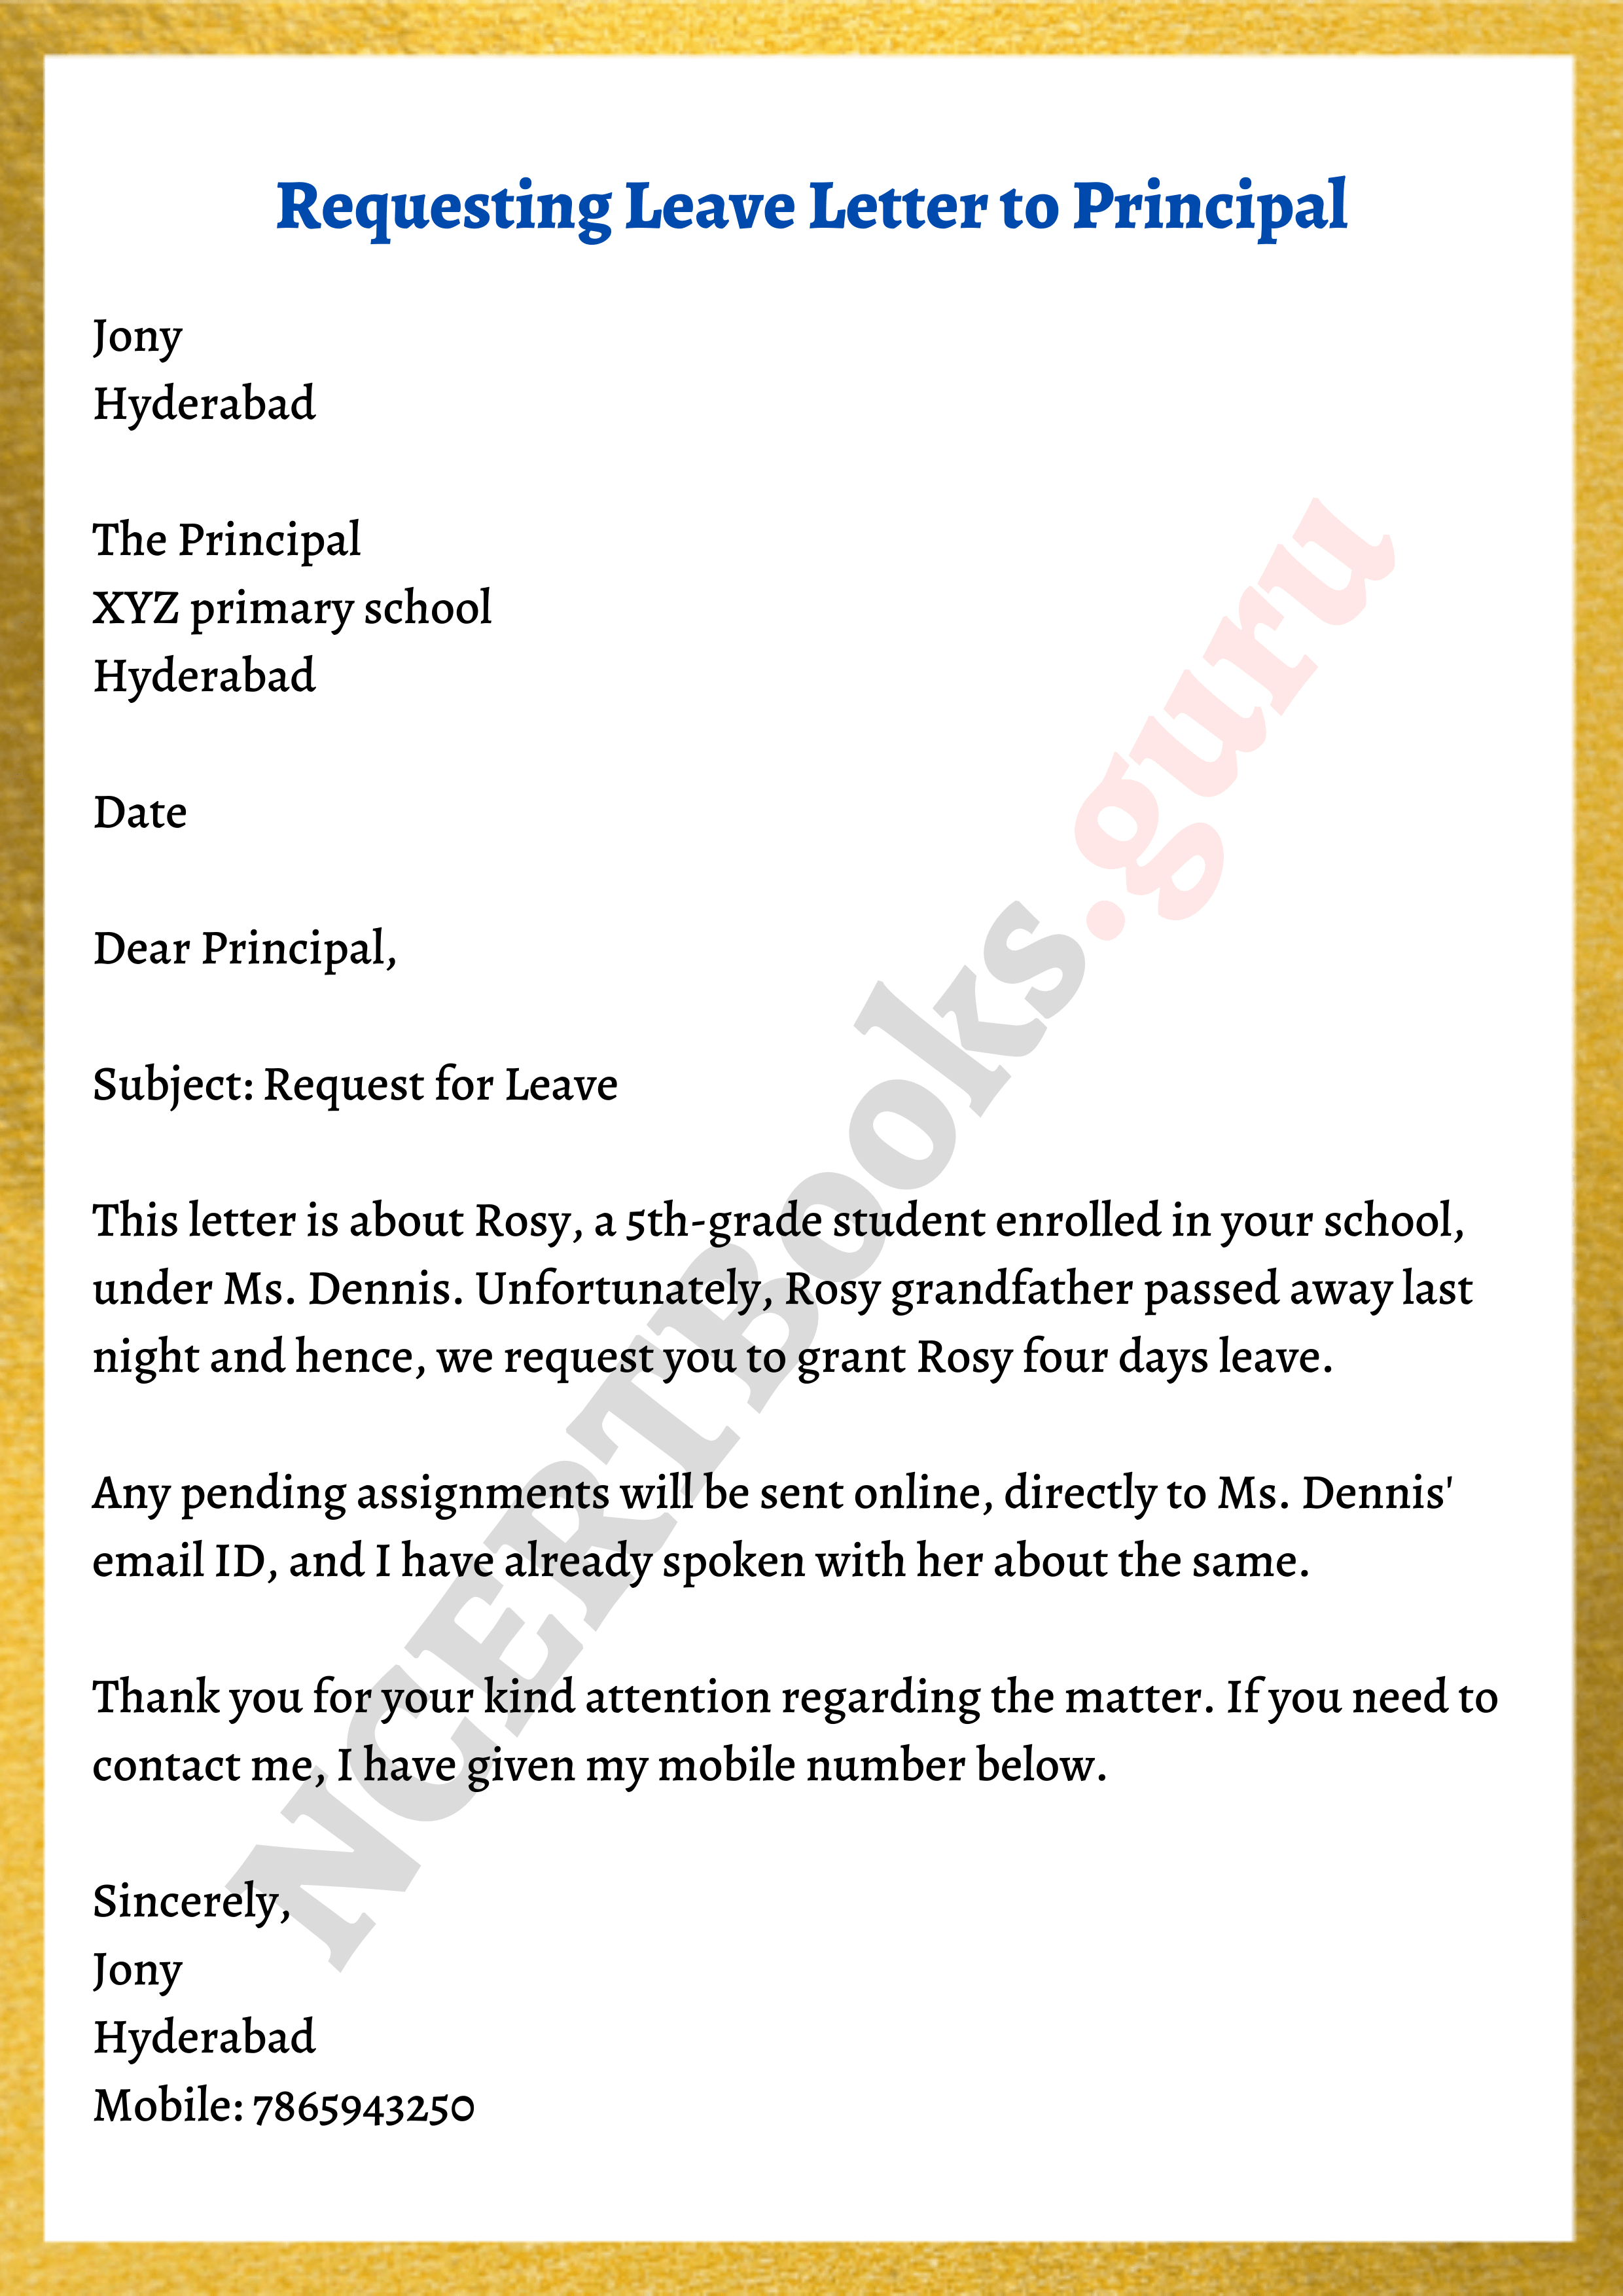 sample application letter to principal for leave